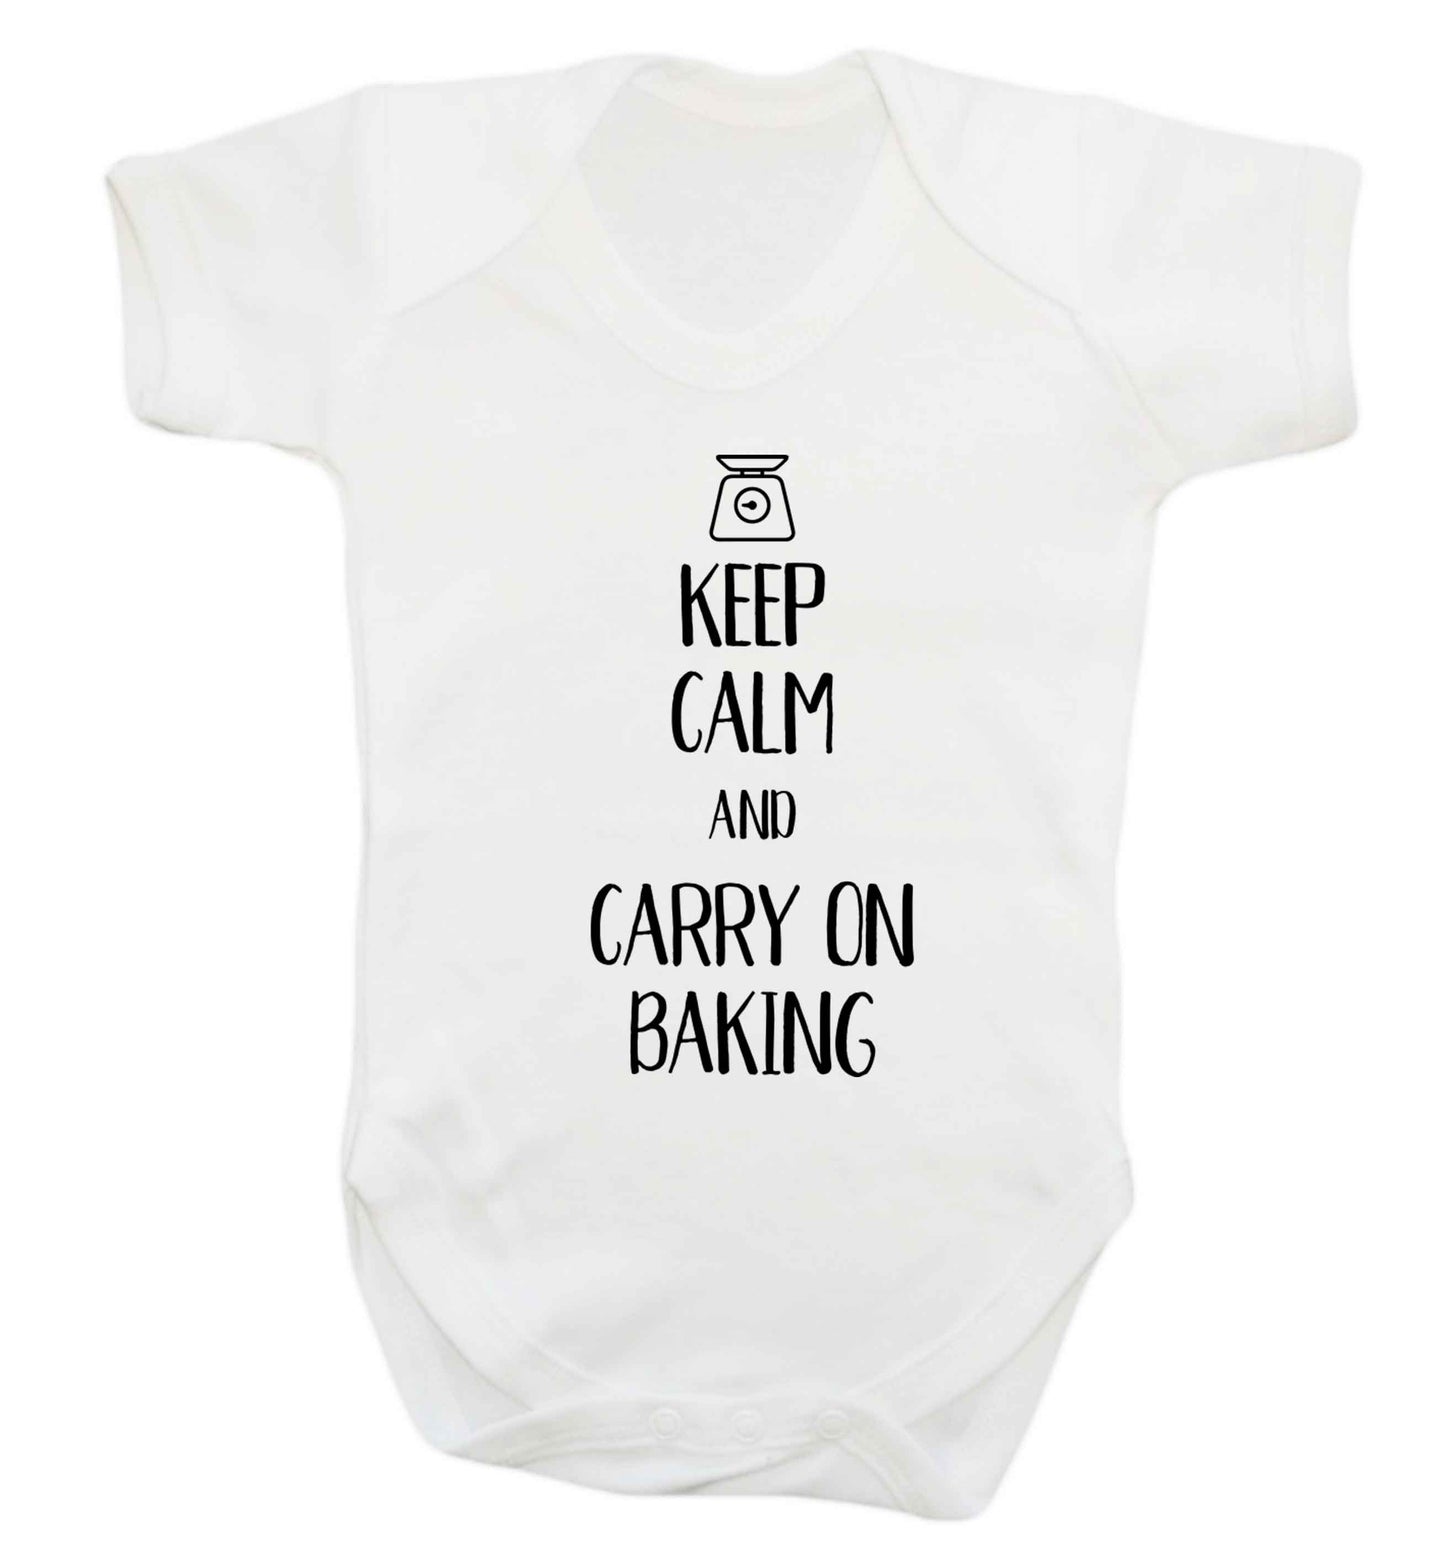 Keep calm and carry on baking Baby Vest white 18-24 months